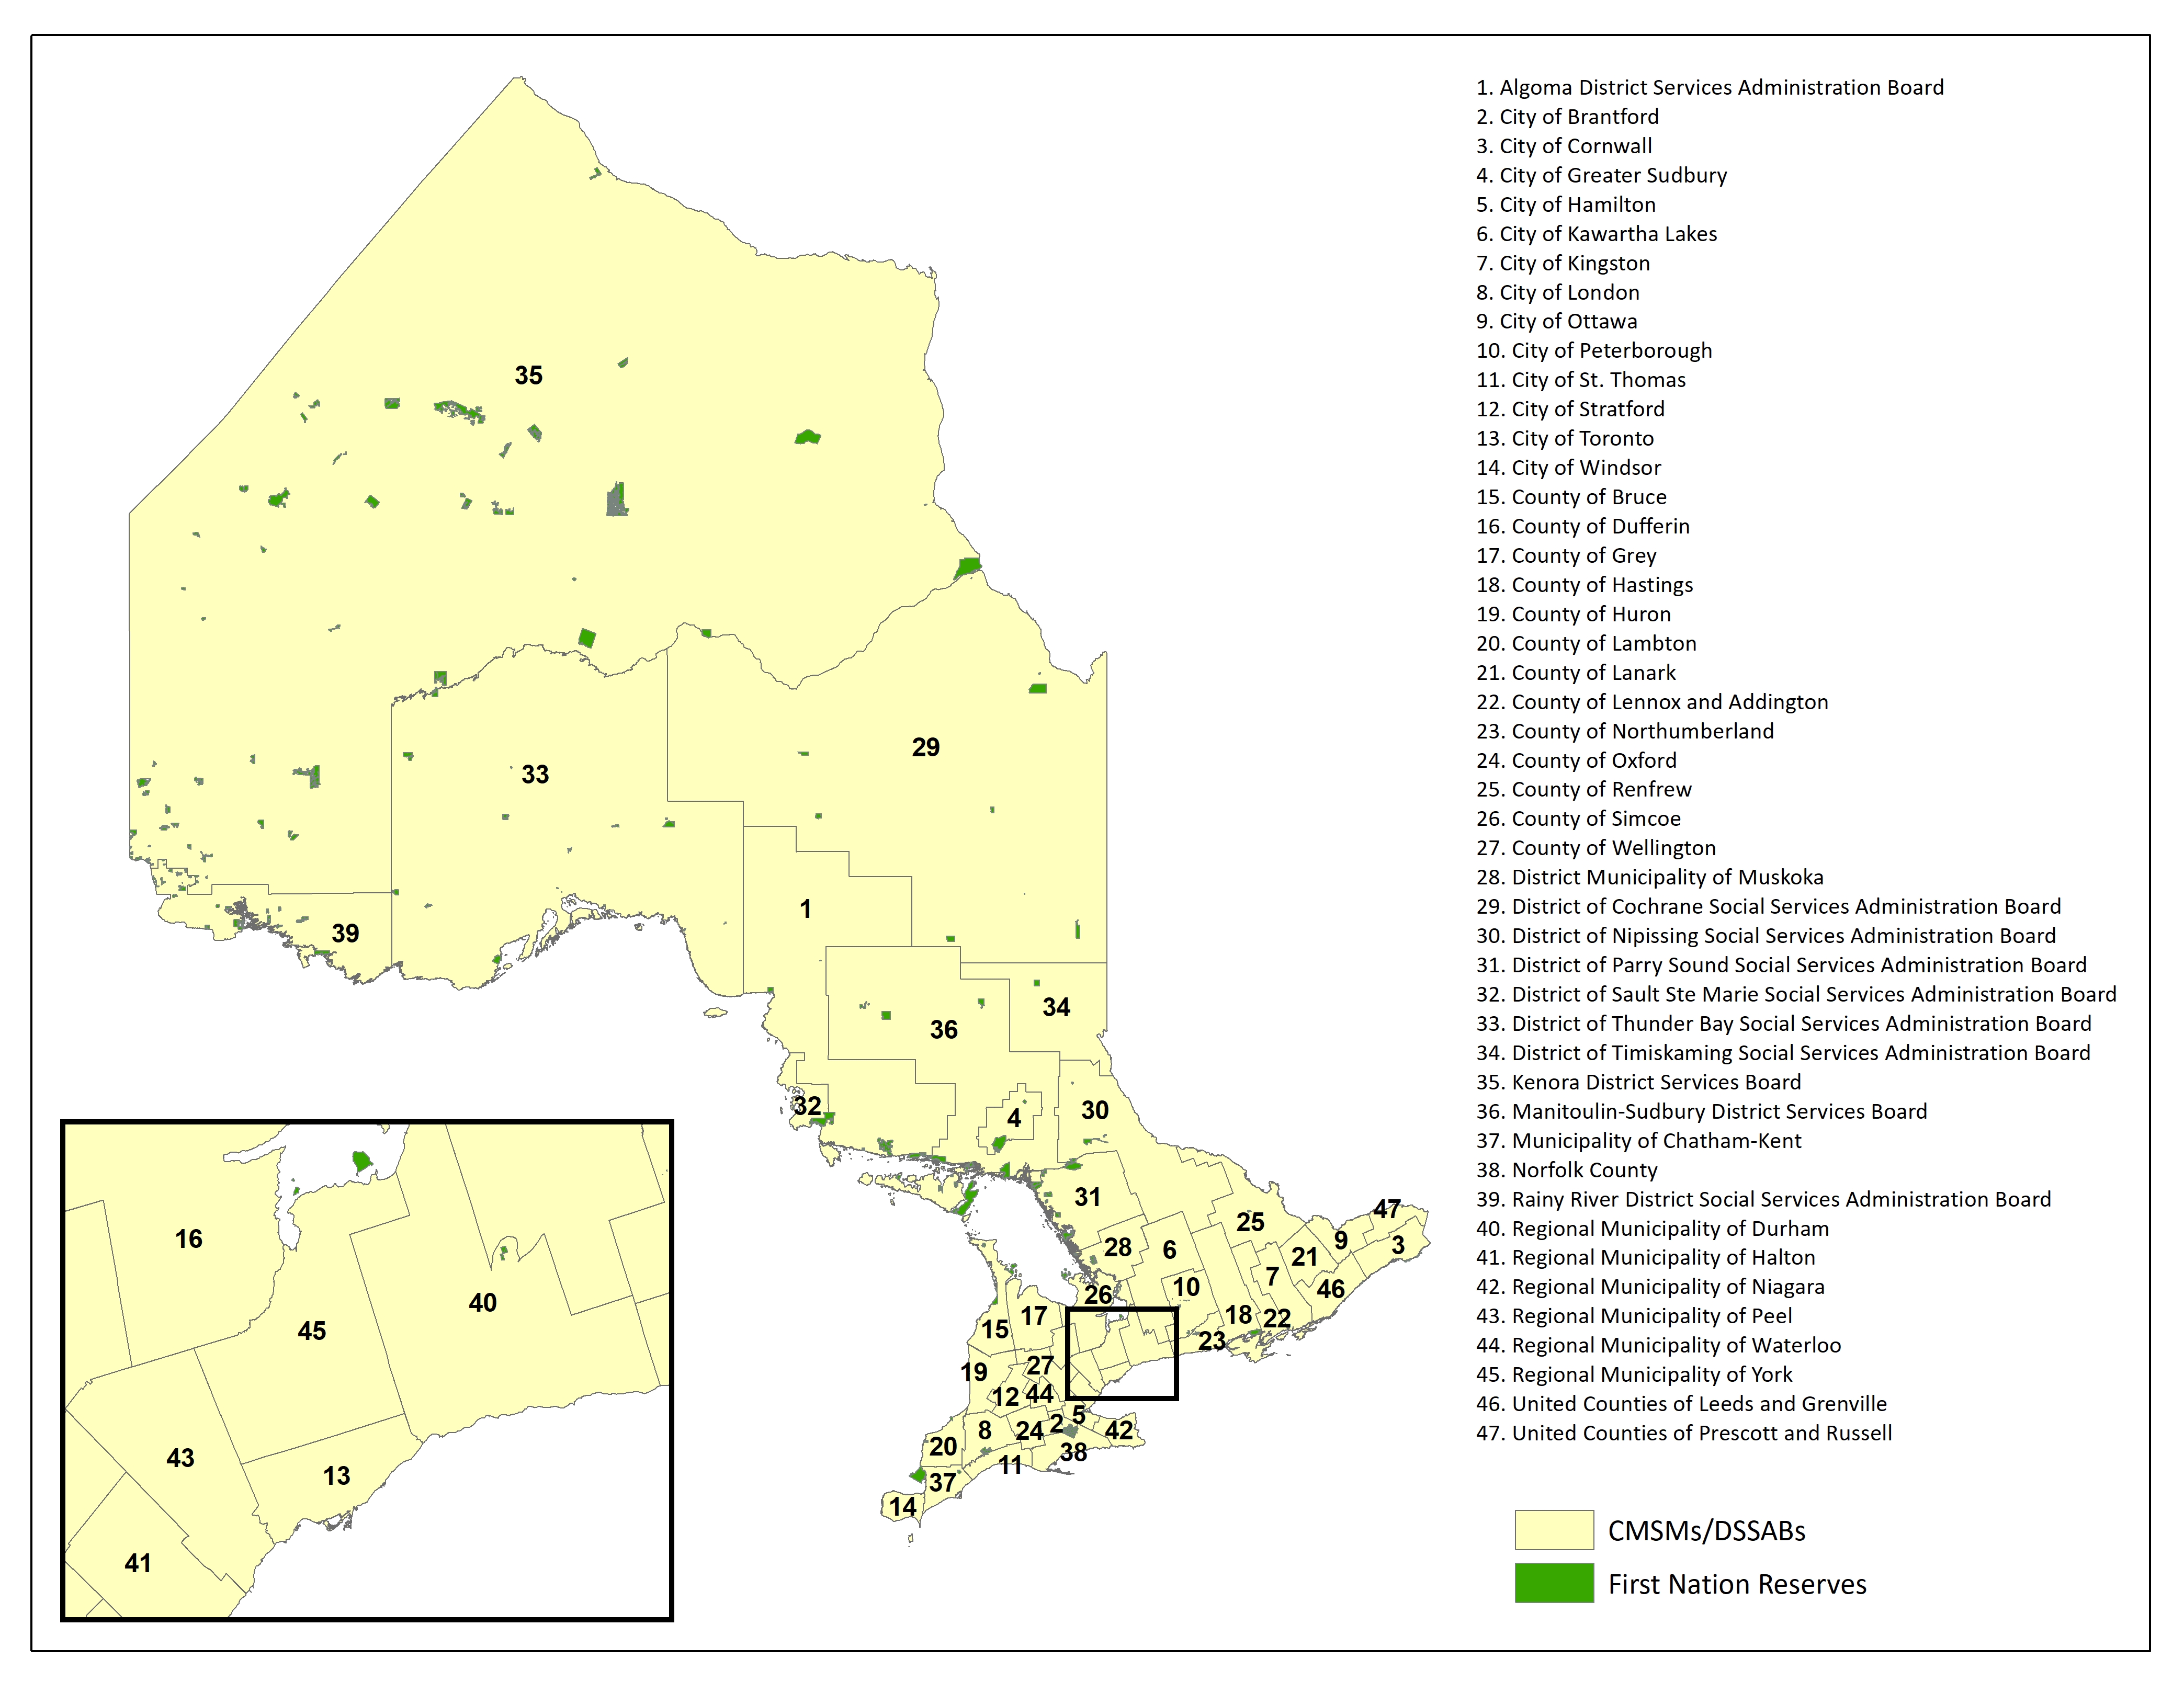 Map of Ontario showing the locations of Consolidated Municipal Service Managers and District Social Services Administration Boards